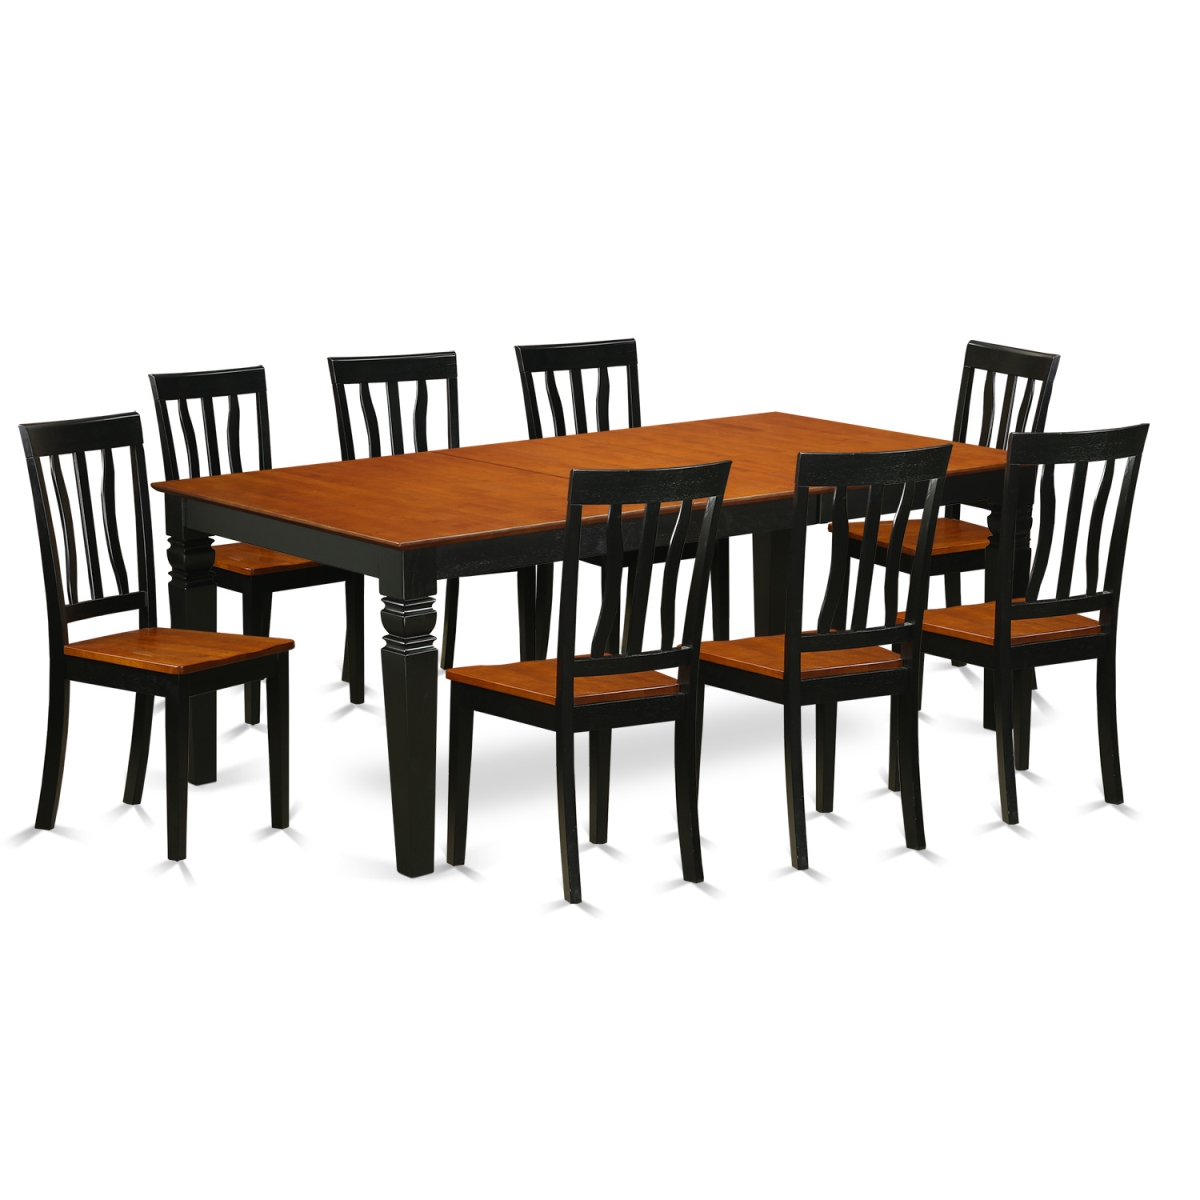 Kitchen Dinette Set With One Logan Table & 8 Chairs, Black & Cherry - 9 Piece